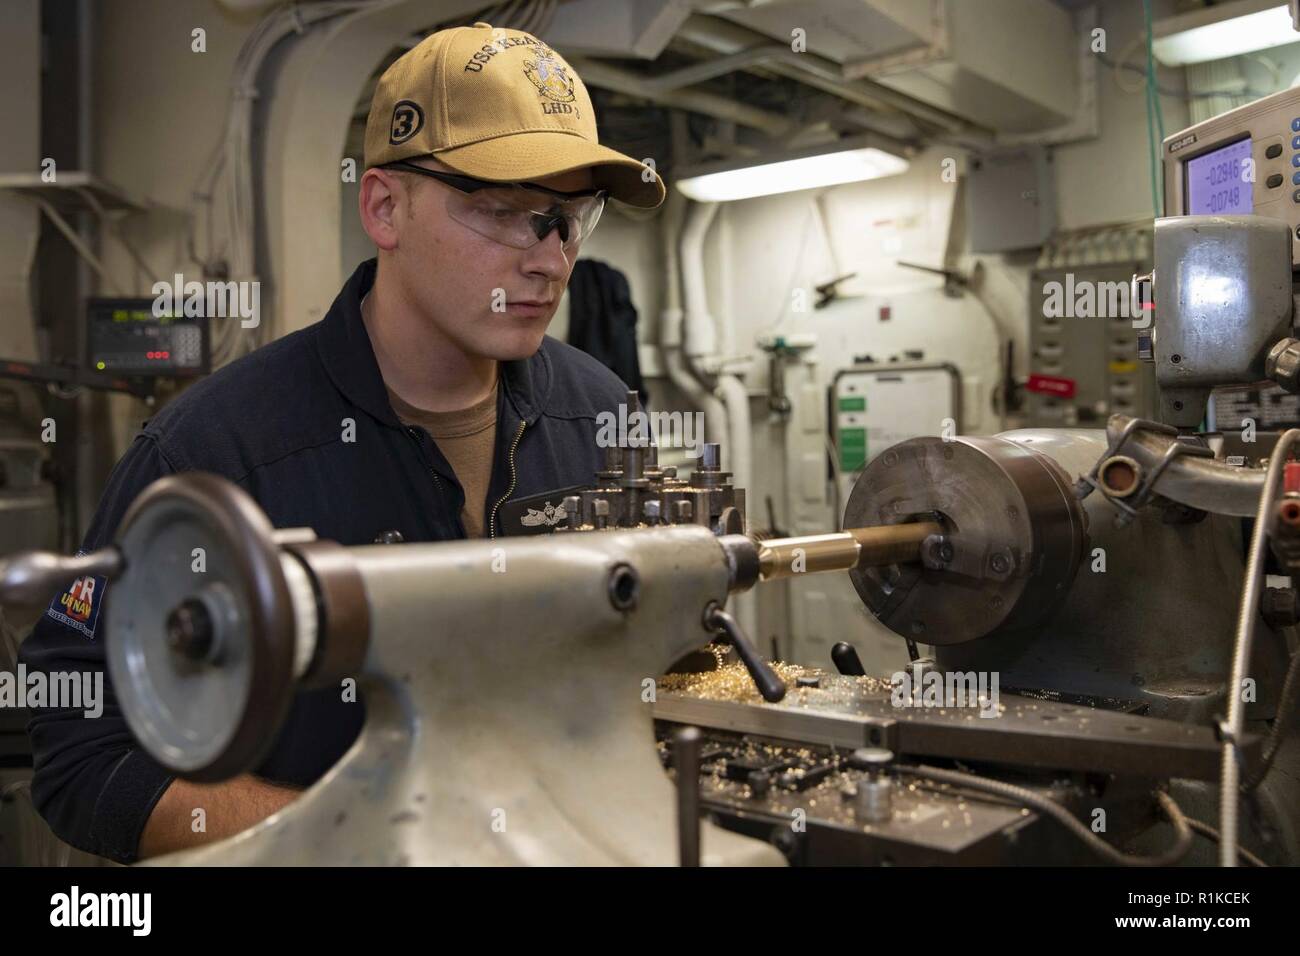 ATLANTIC OCEAN (Oct. 14, 2018)  Machinery Repairman 2nd Class Brandon Weddel operates a lathe while manufacturing a bolt aboard the Wasp-class amphibious assault ship USS Kearsarge (LHD 3). Kearsarge is underway for amphibious ready group training and deployment certifications. Stock Photo